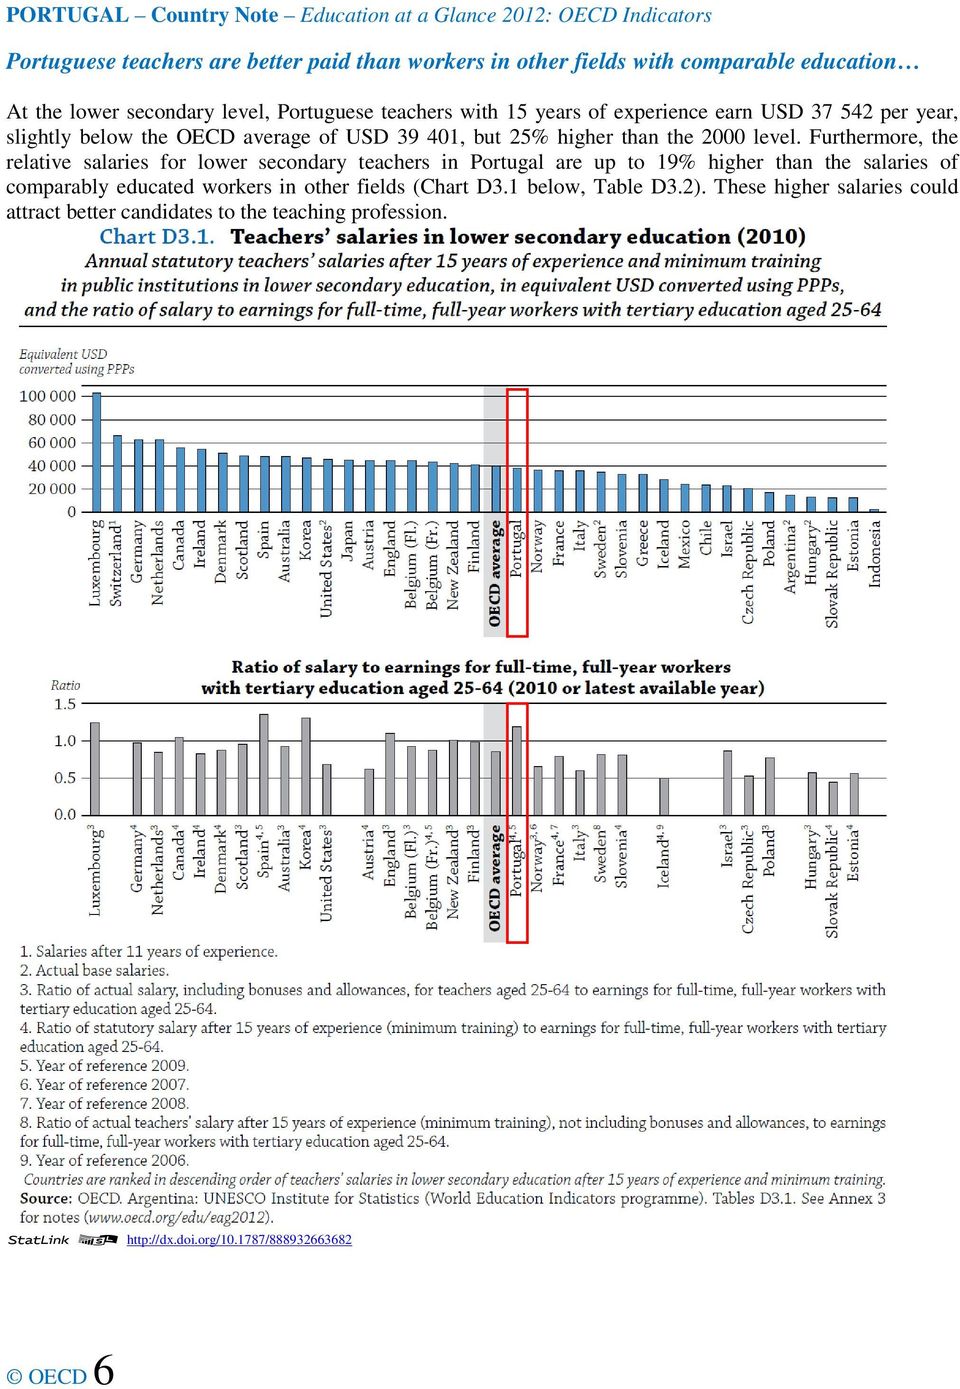 Furthermore, the relative salaries for lower secondary teachers in Portugal are up to 19% higher than the salaries of comparably educated workers in